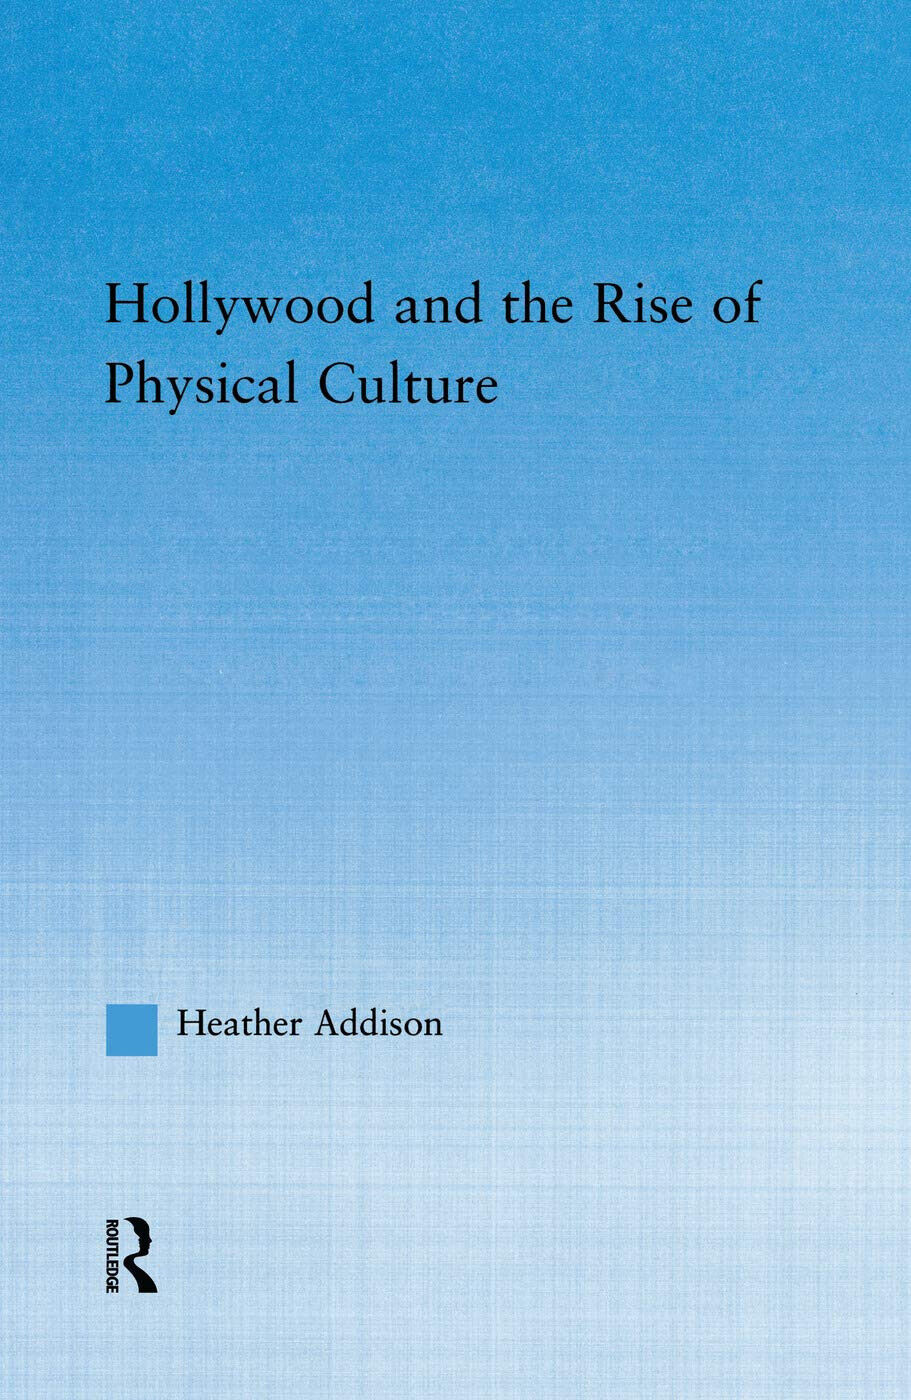 Hollywood and the Rise of Physical Culture - Heather Addison - Routledge, 2015 libro usato